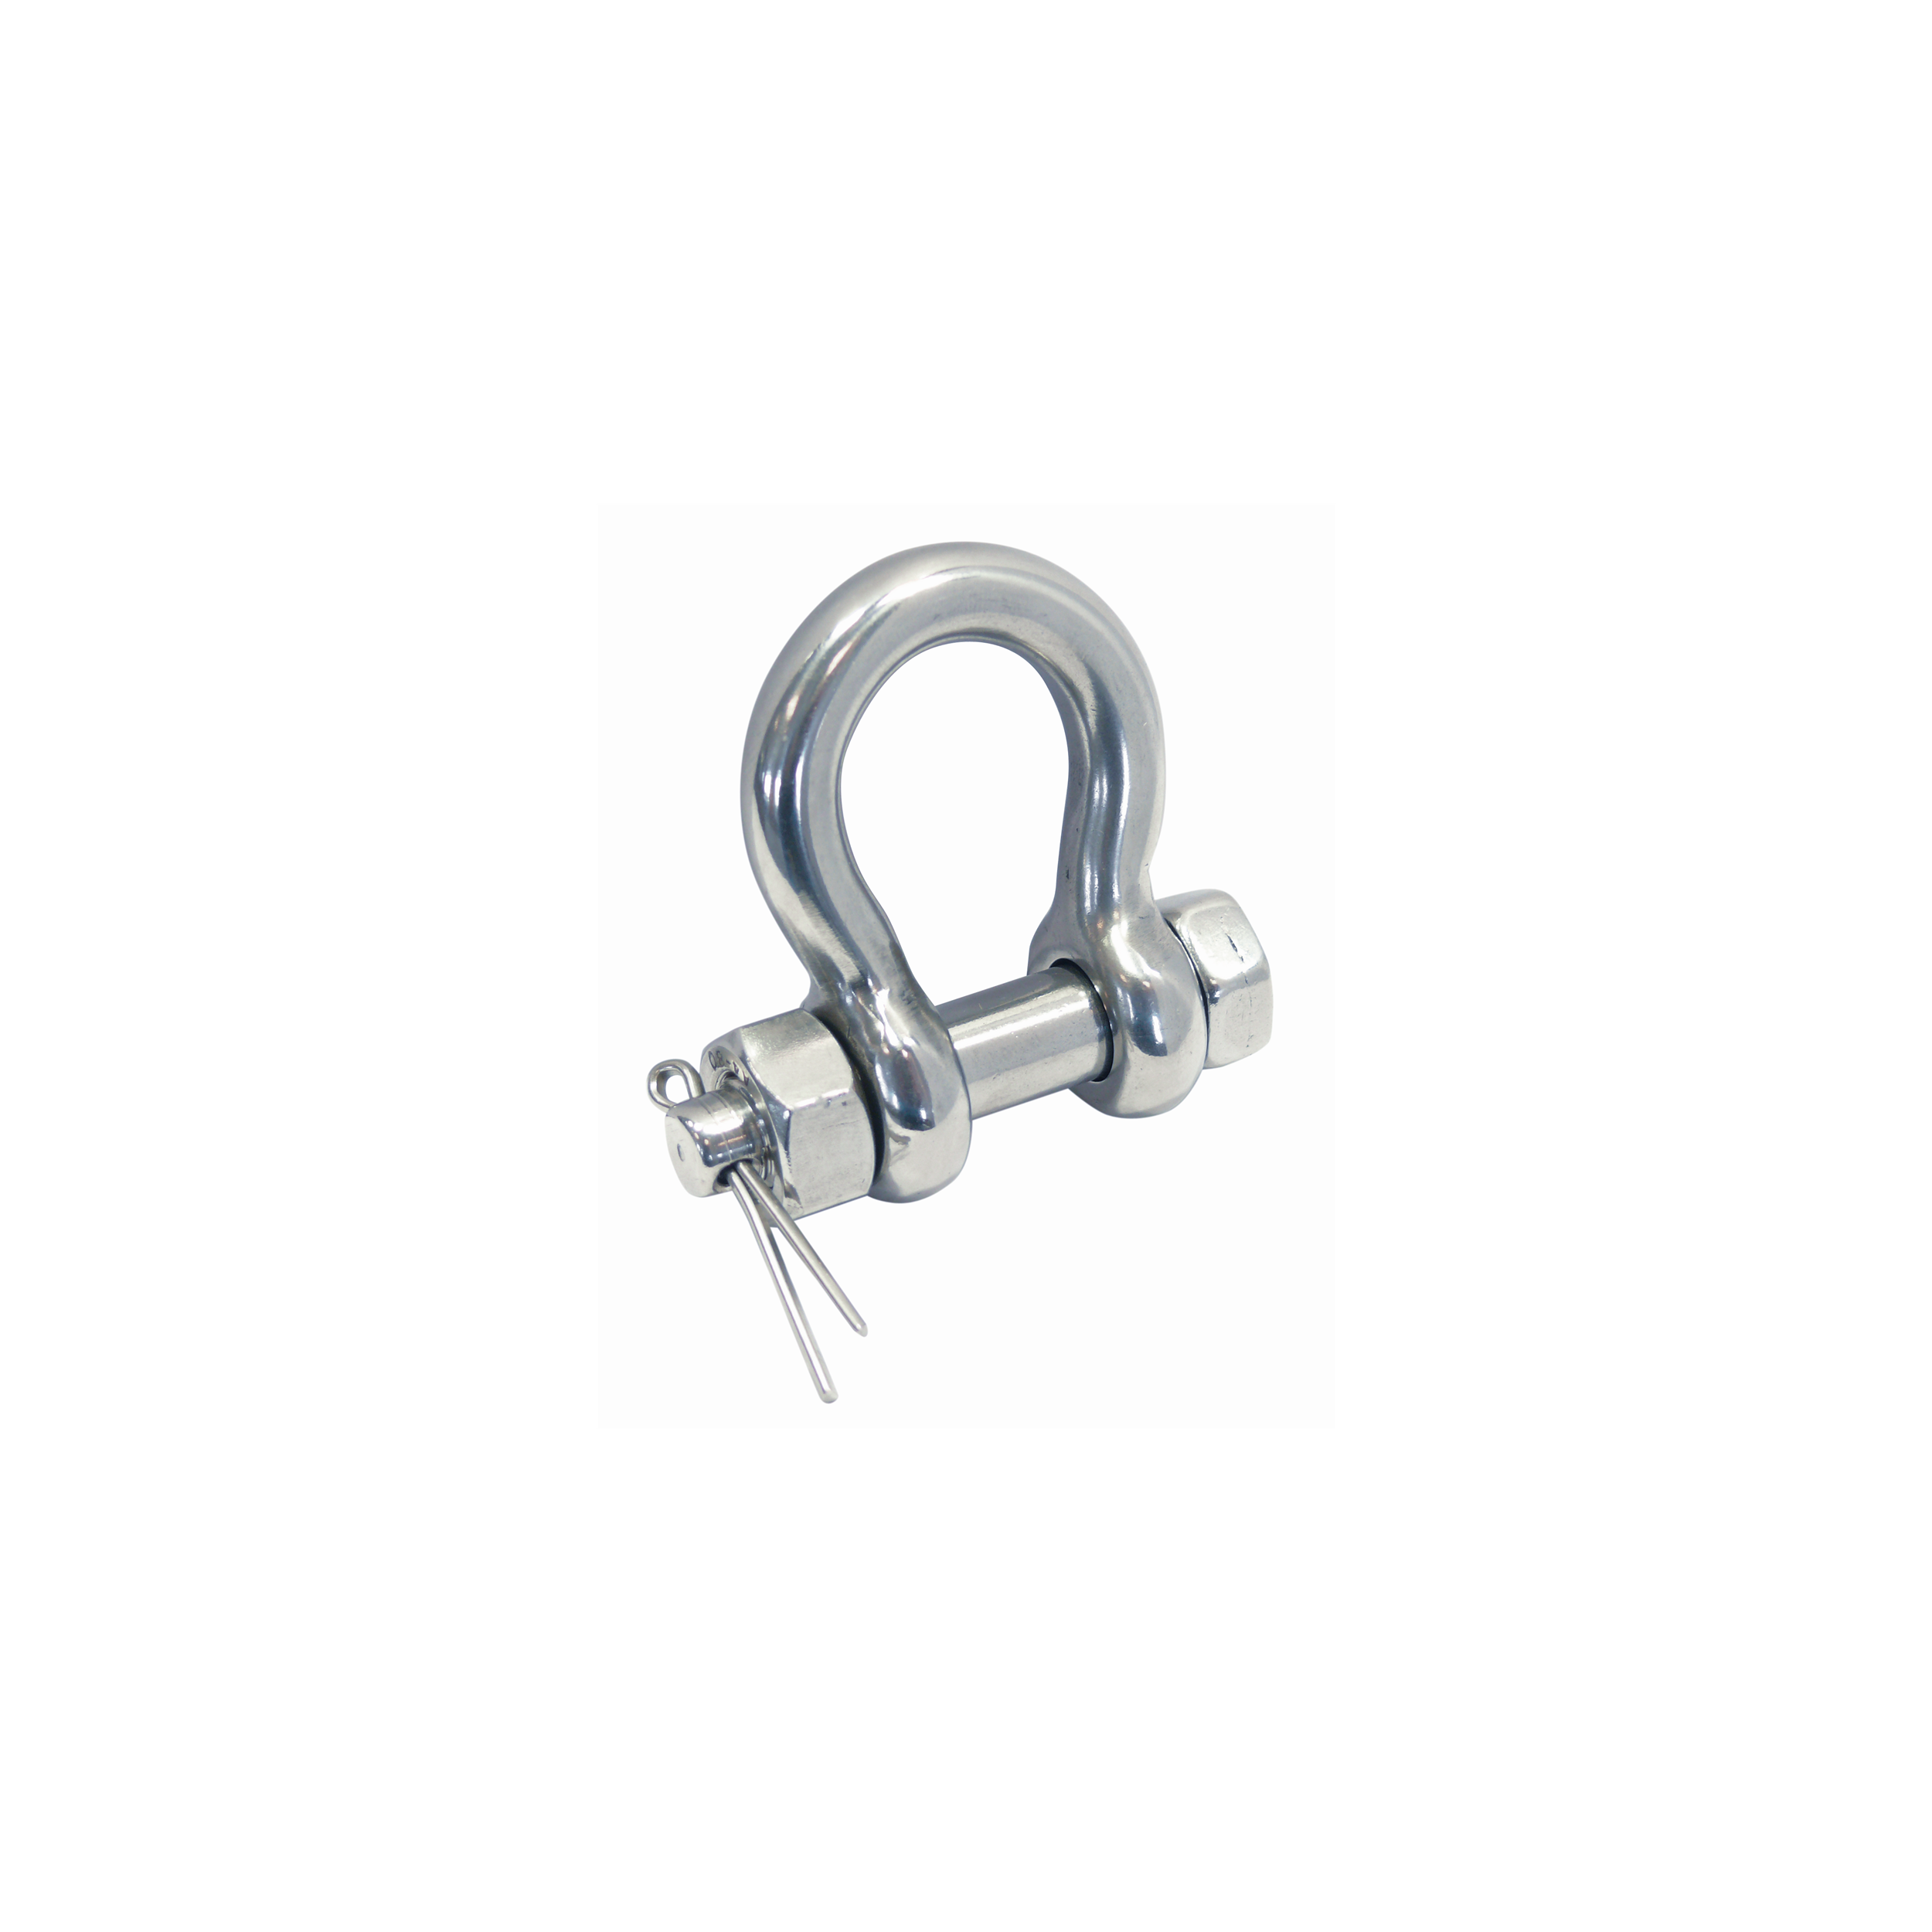 Bow shackle with secure bolt A4  bolt 6.4mm, bow 5mm